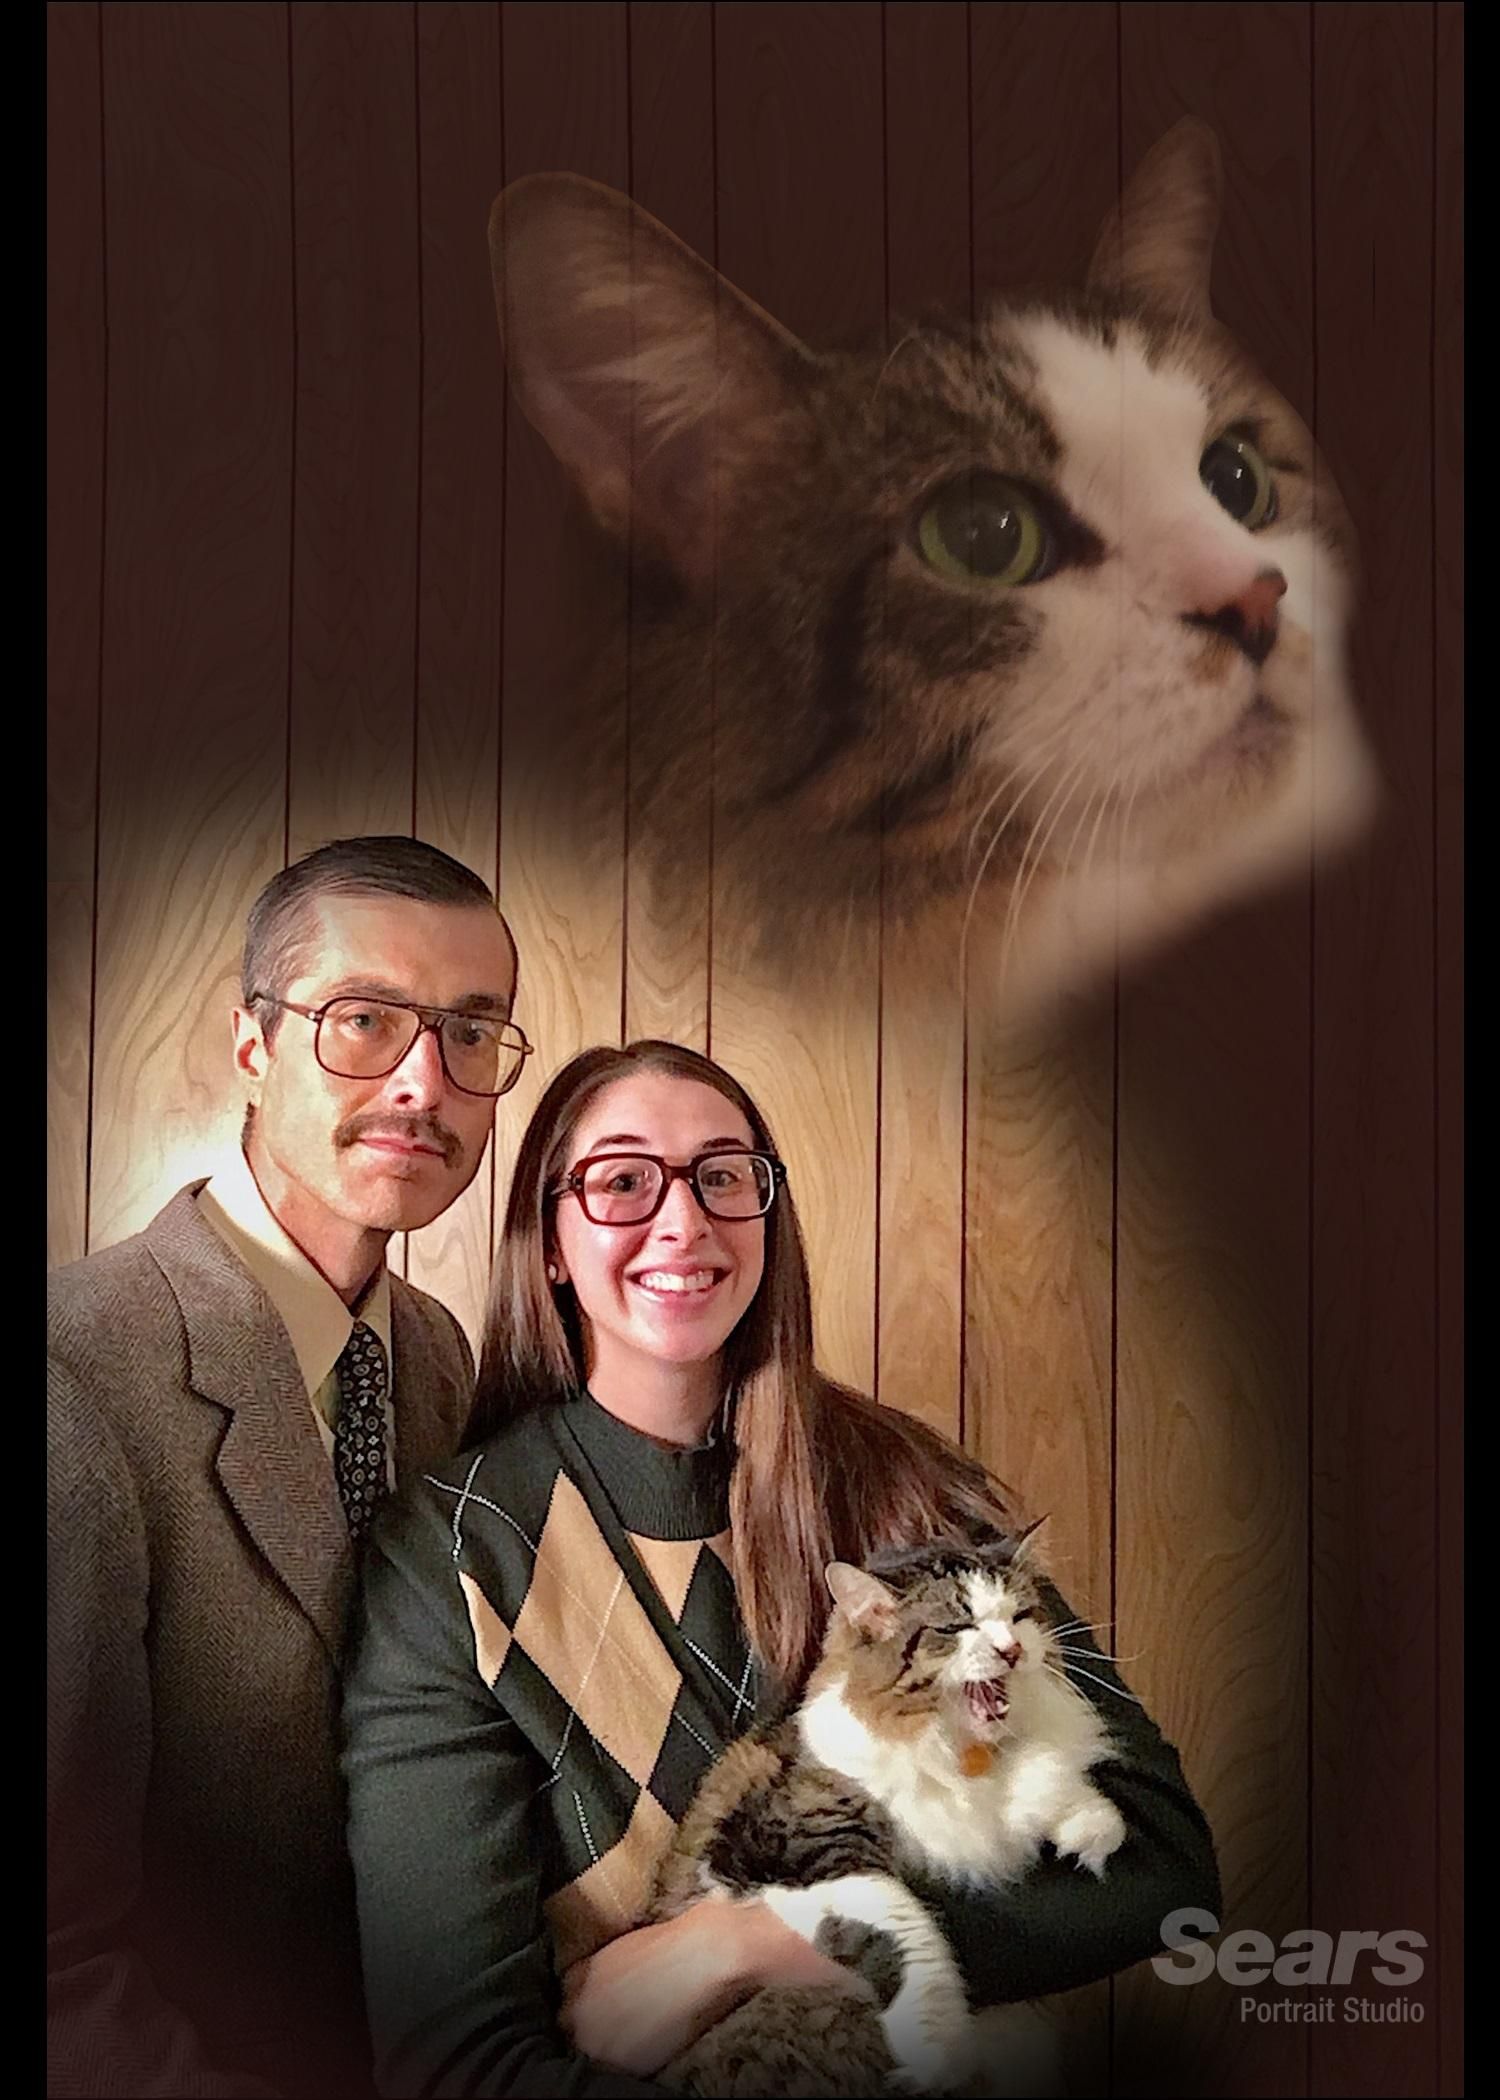 My wife and I went retro for our Christmas card portrait this year.